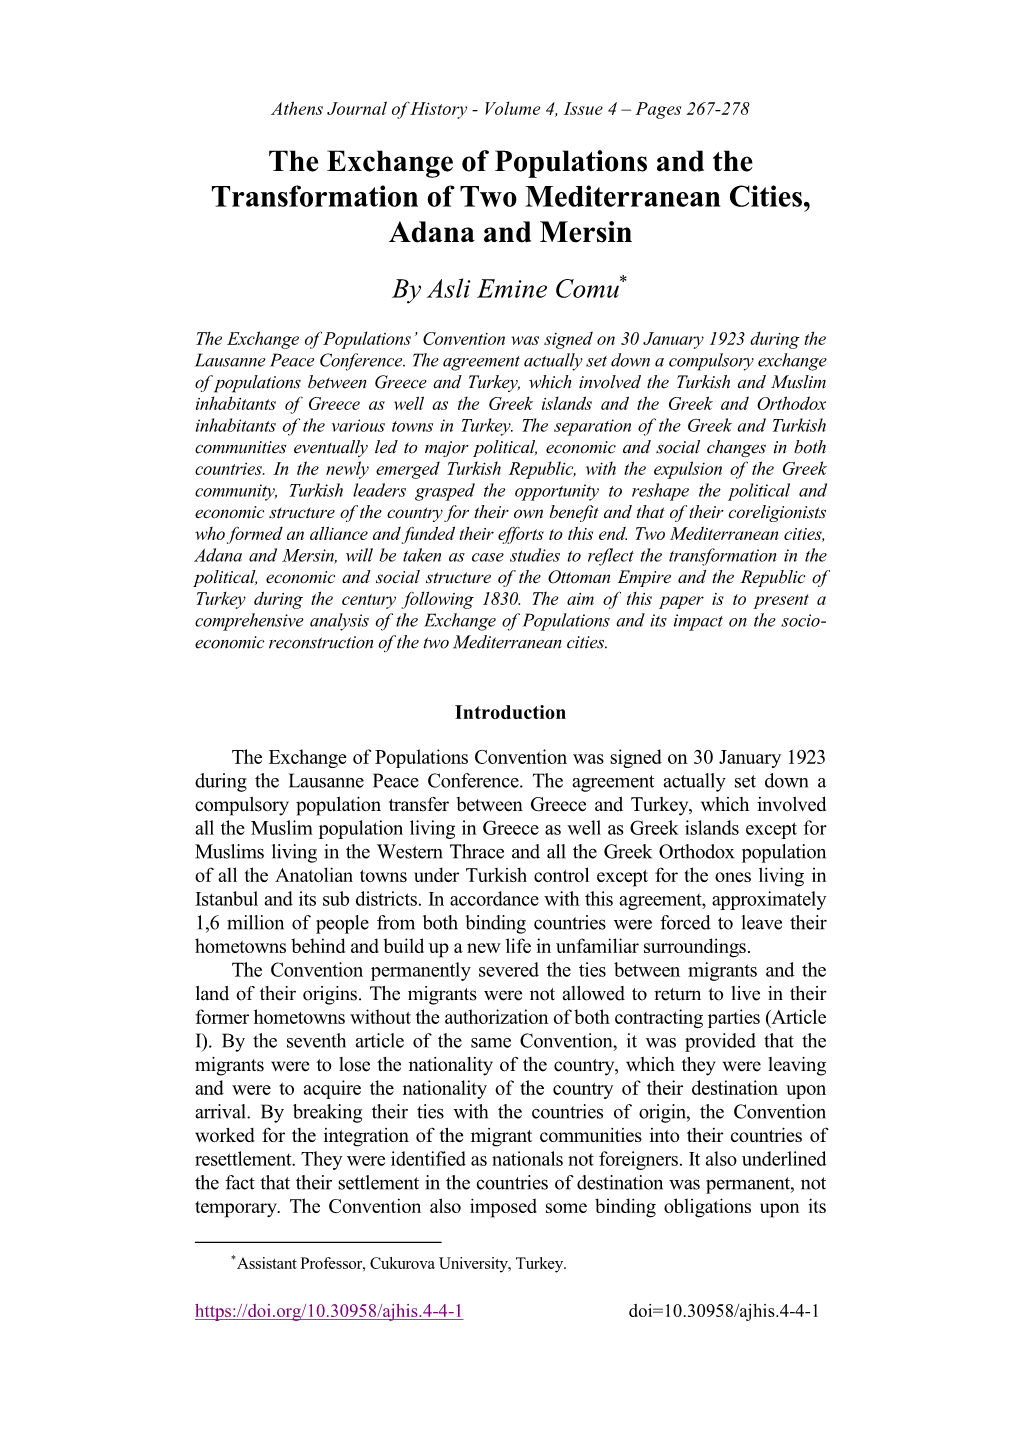 The Exchange of Populations and the Transformation of Two Mediterranean Cities, Adana and Mersin